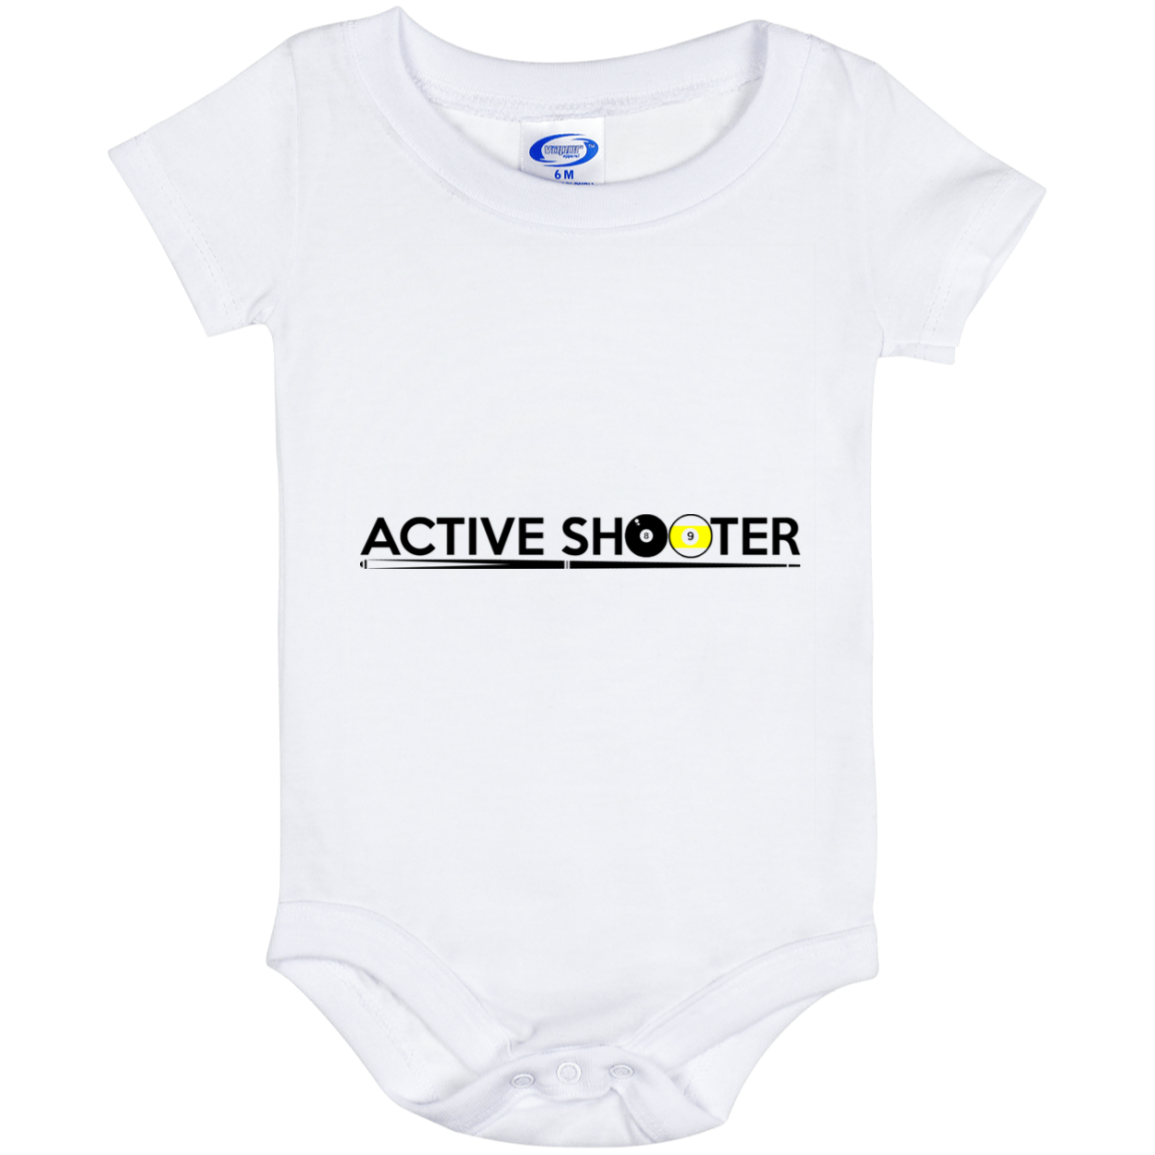 The GHOATS Custom Design #1. Active Shooter. Baby Onesie 6 Month